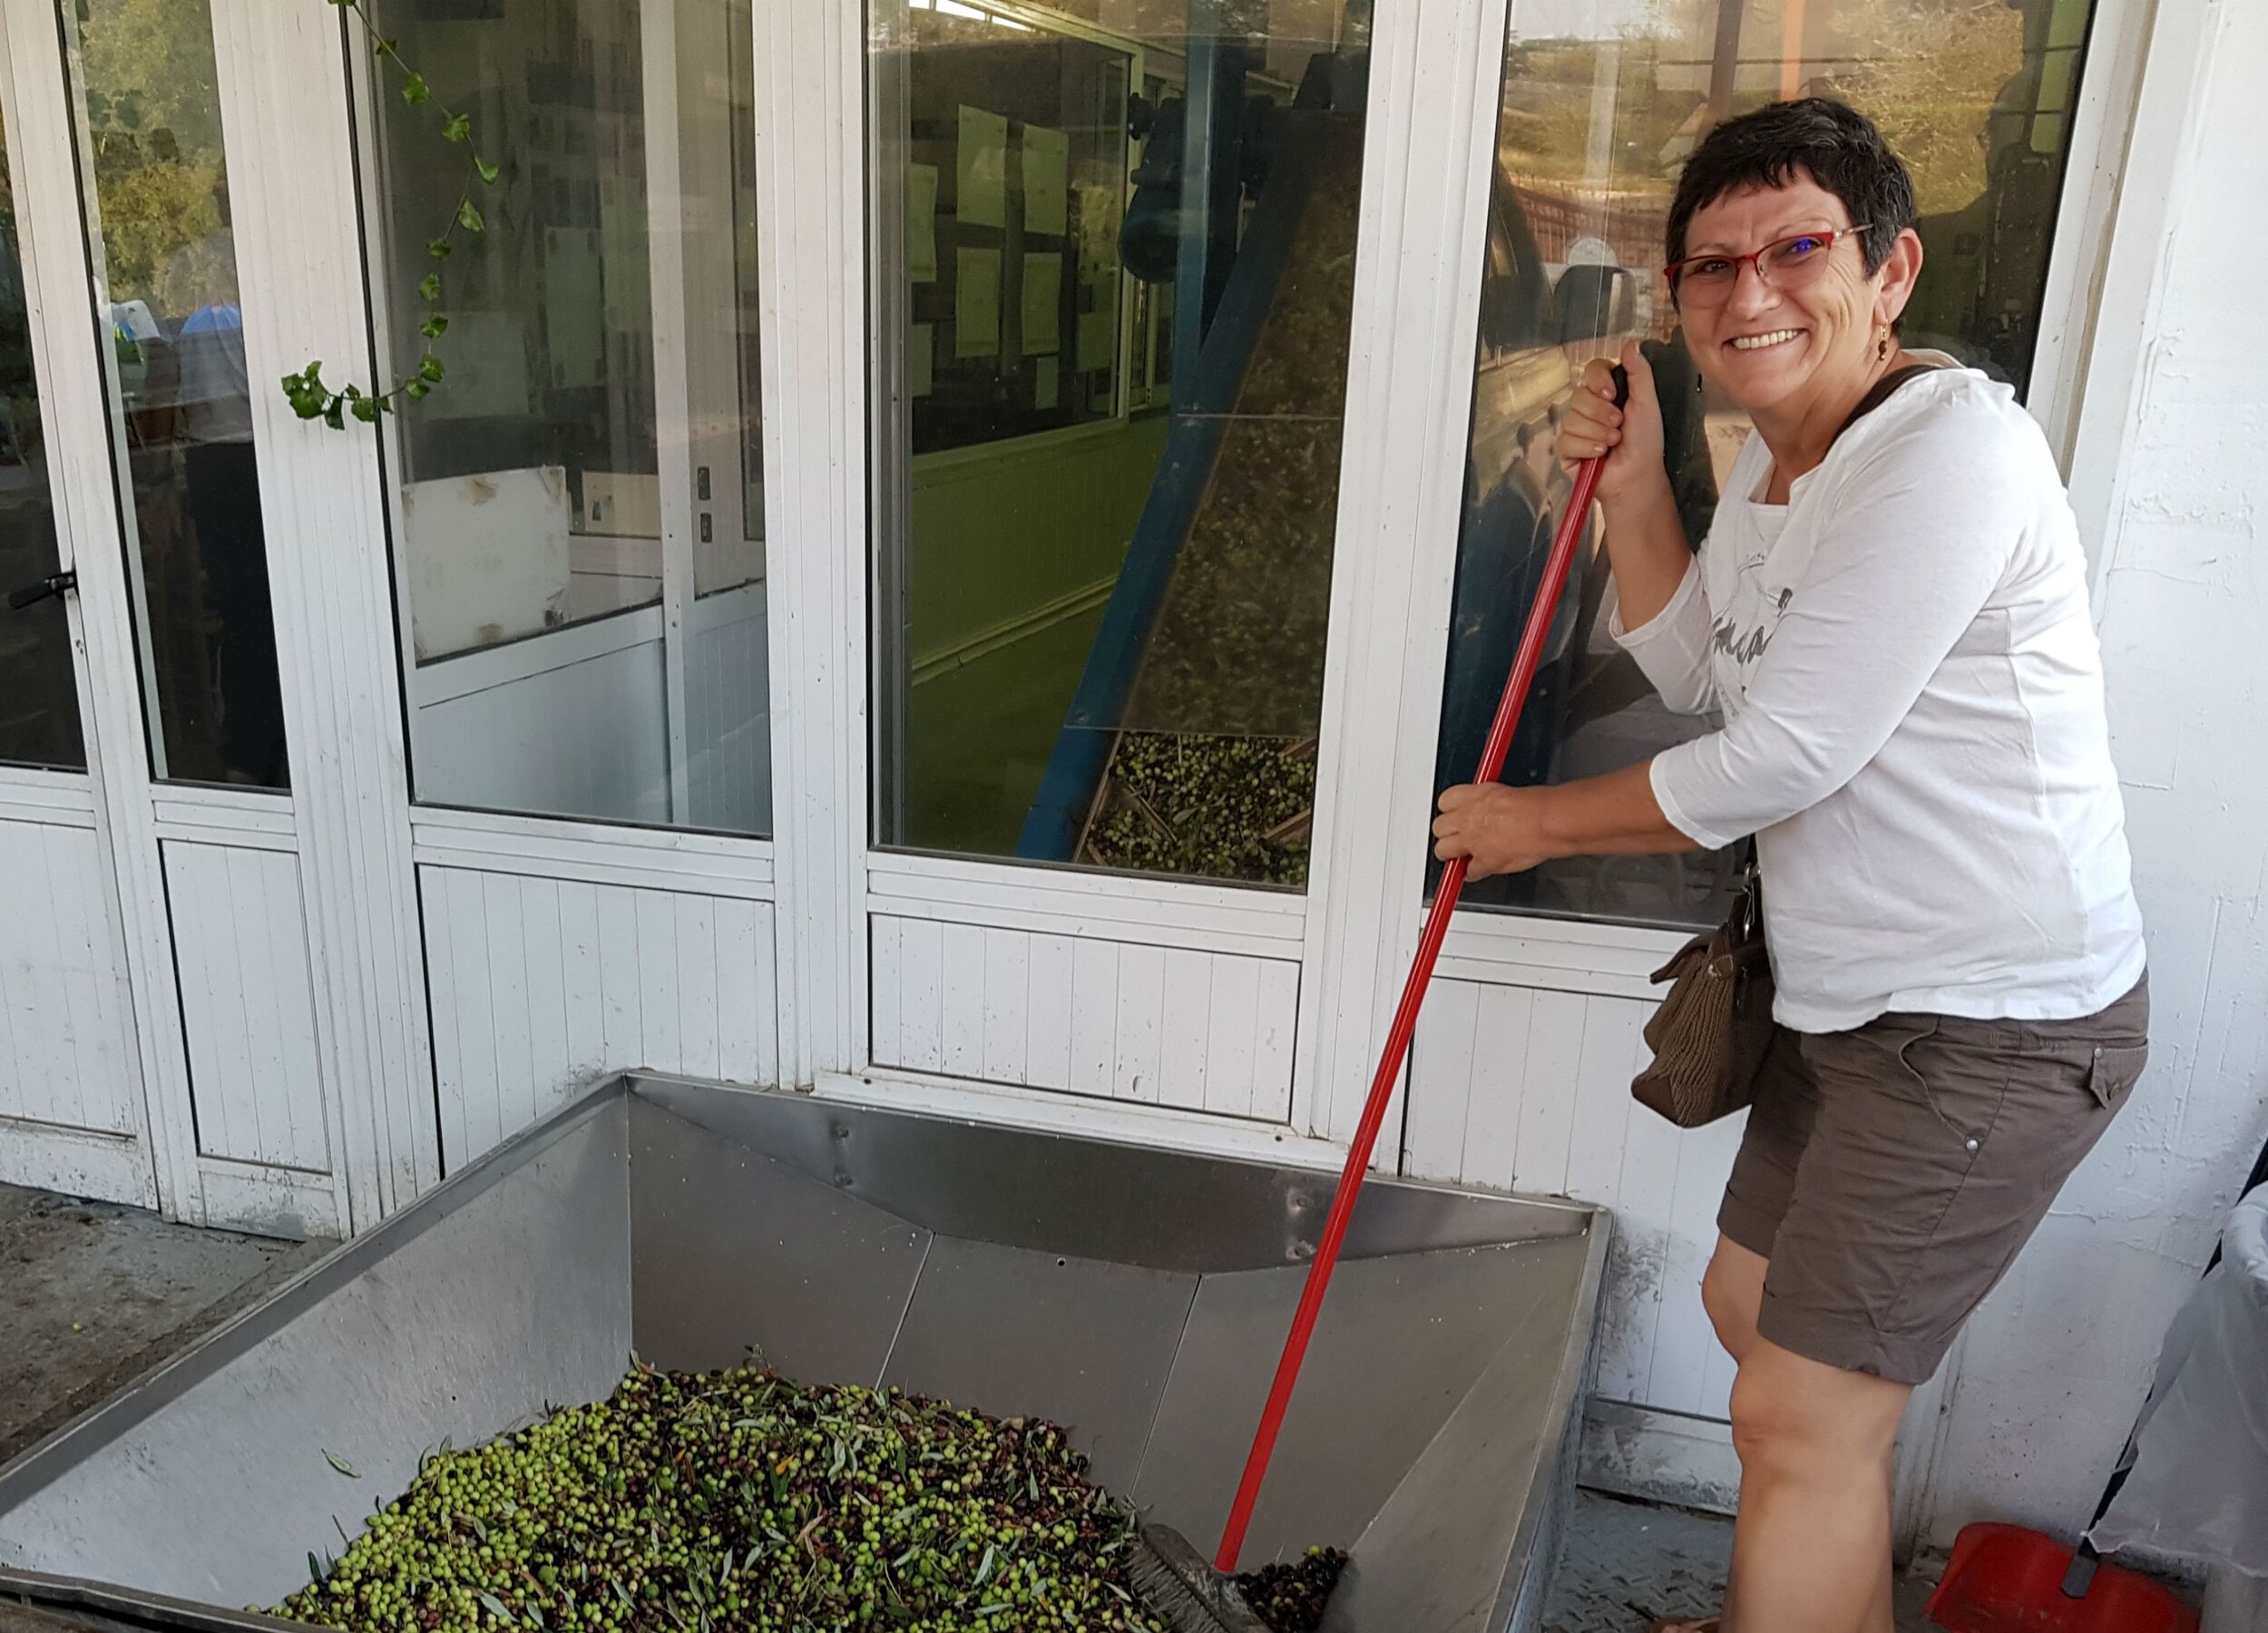 Loading olives into the olive mill